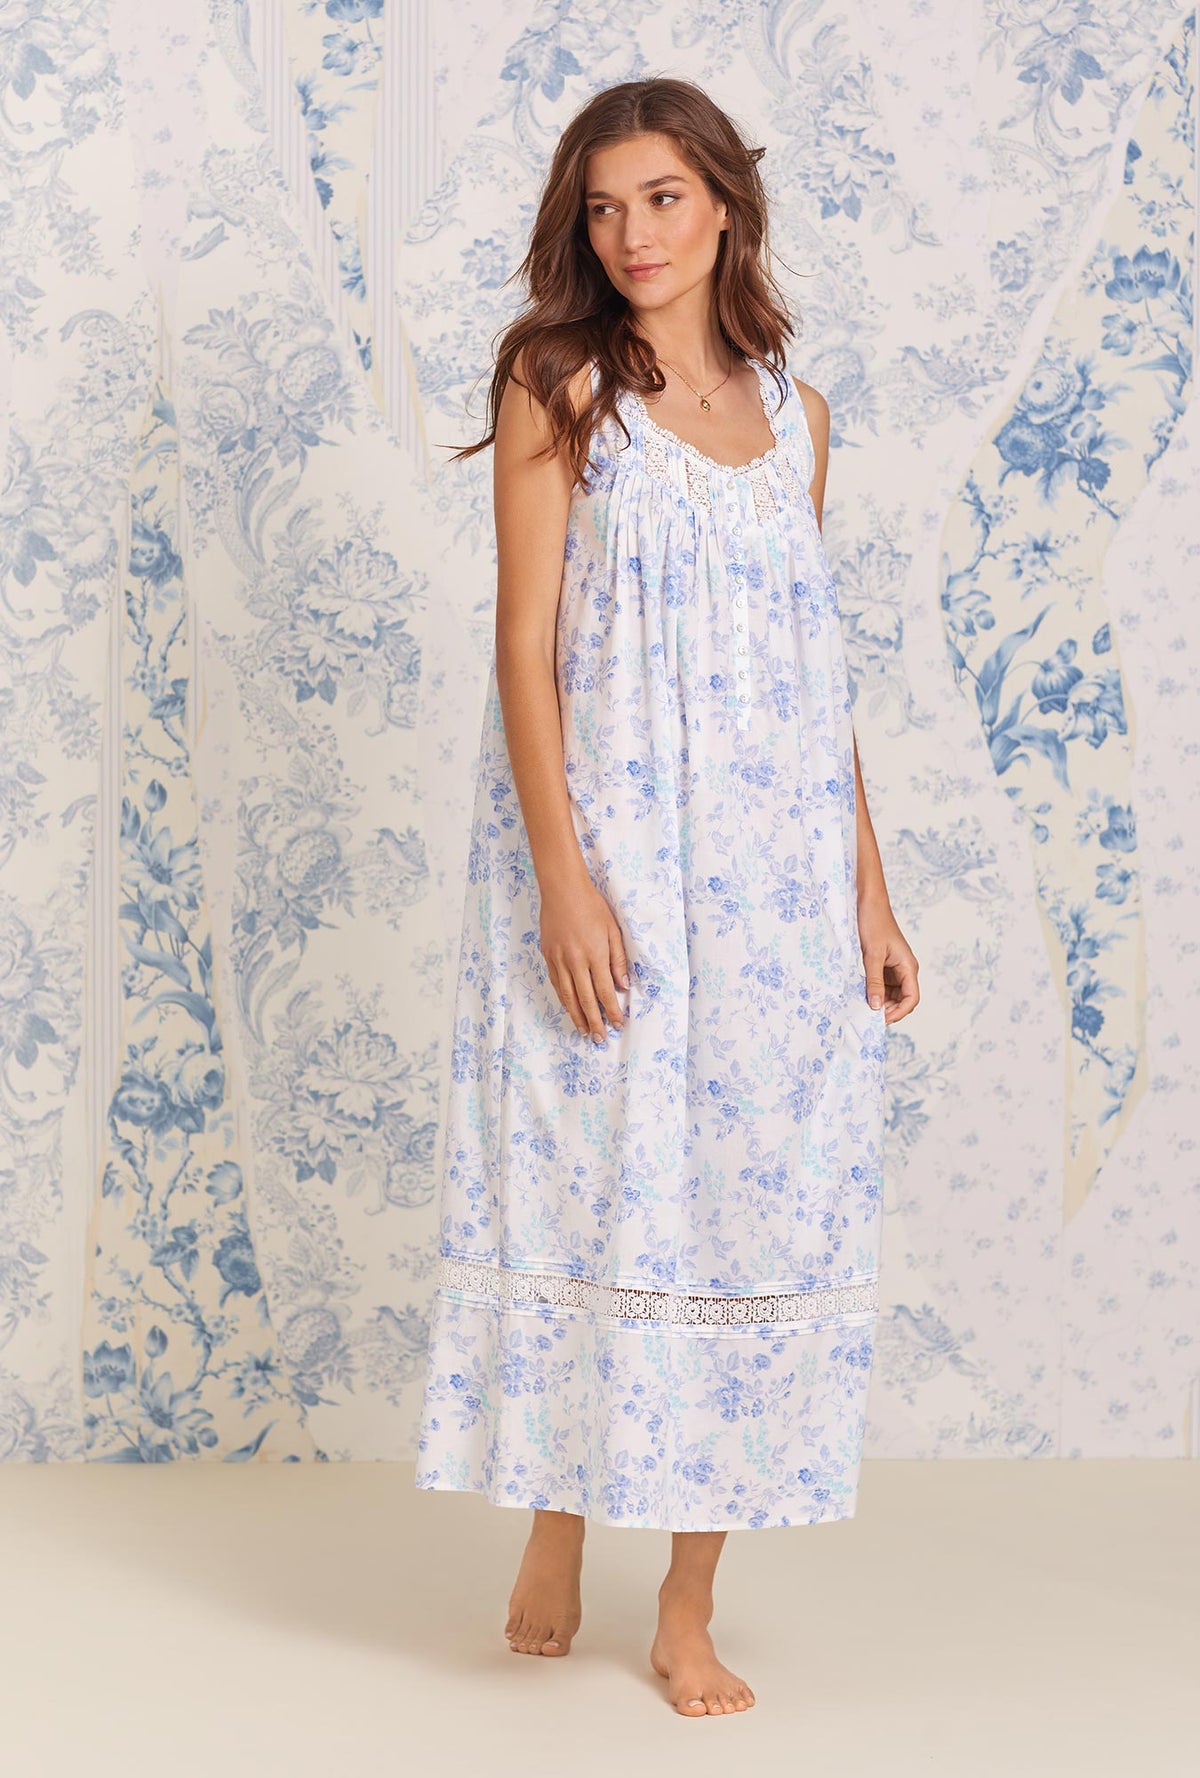 A lady wearing blue sleeveless Nightgown with Moonflower print